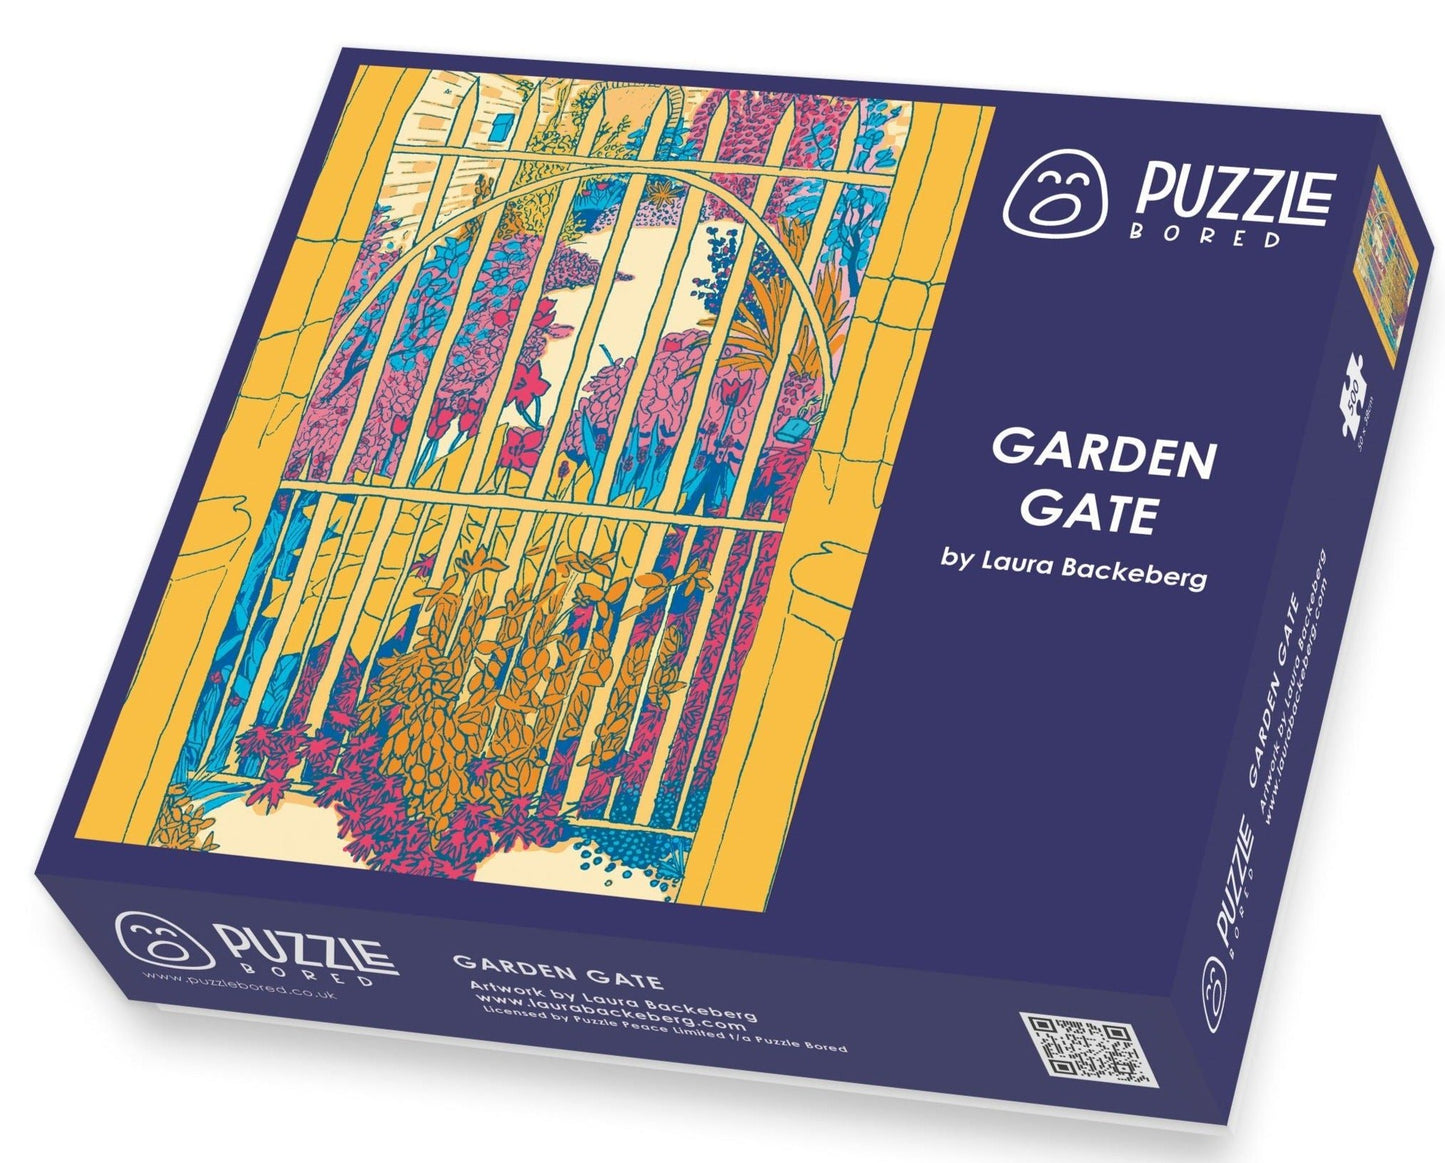 Garden Gate by Laura Backeberg - Puzzle Bored